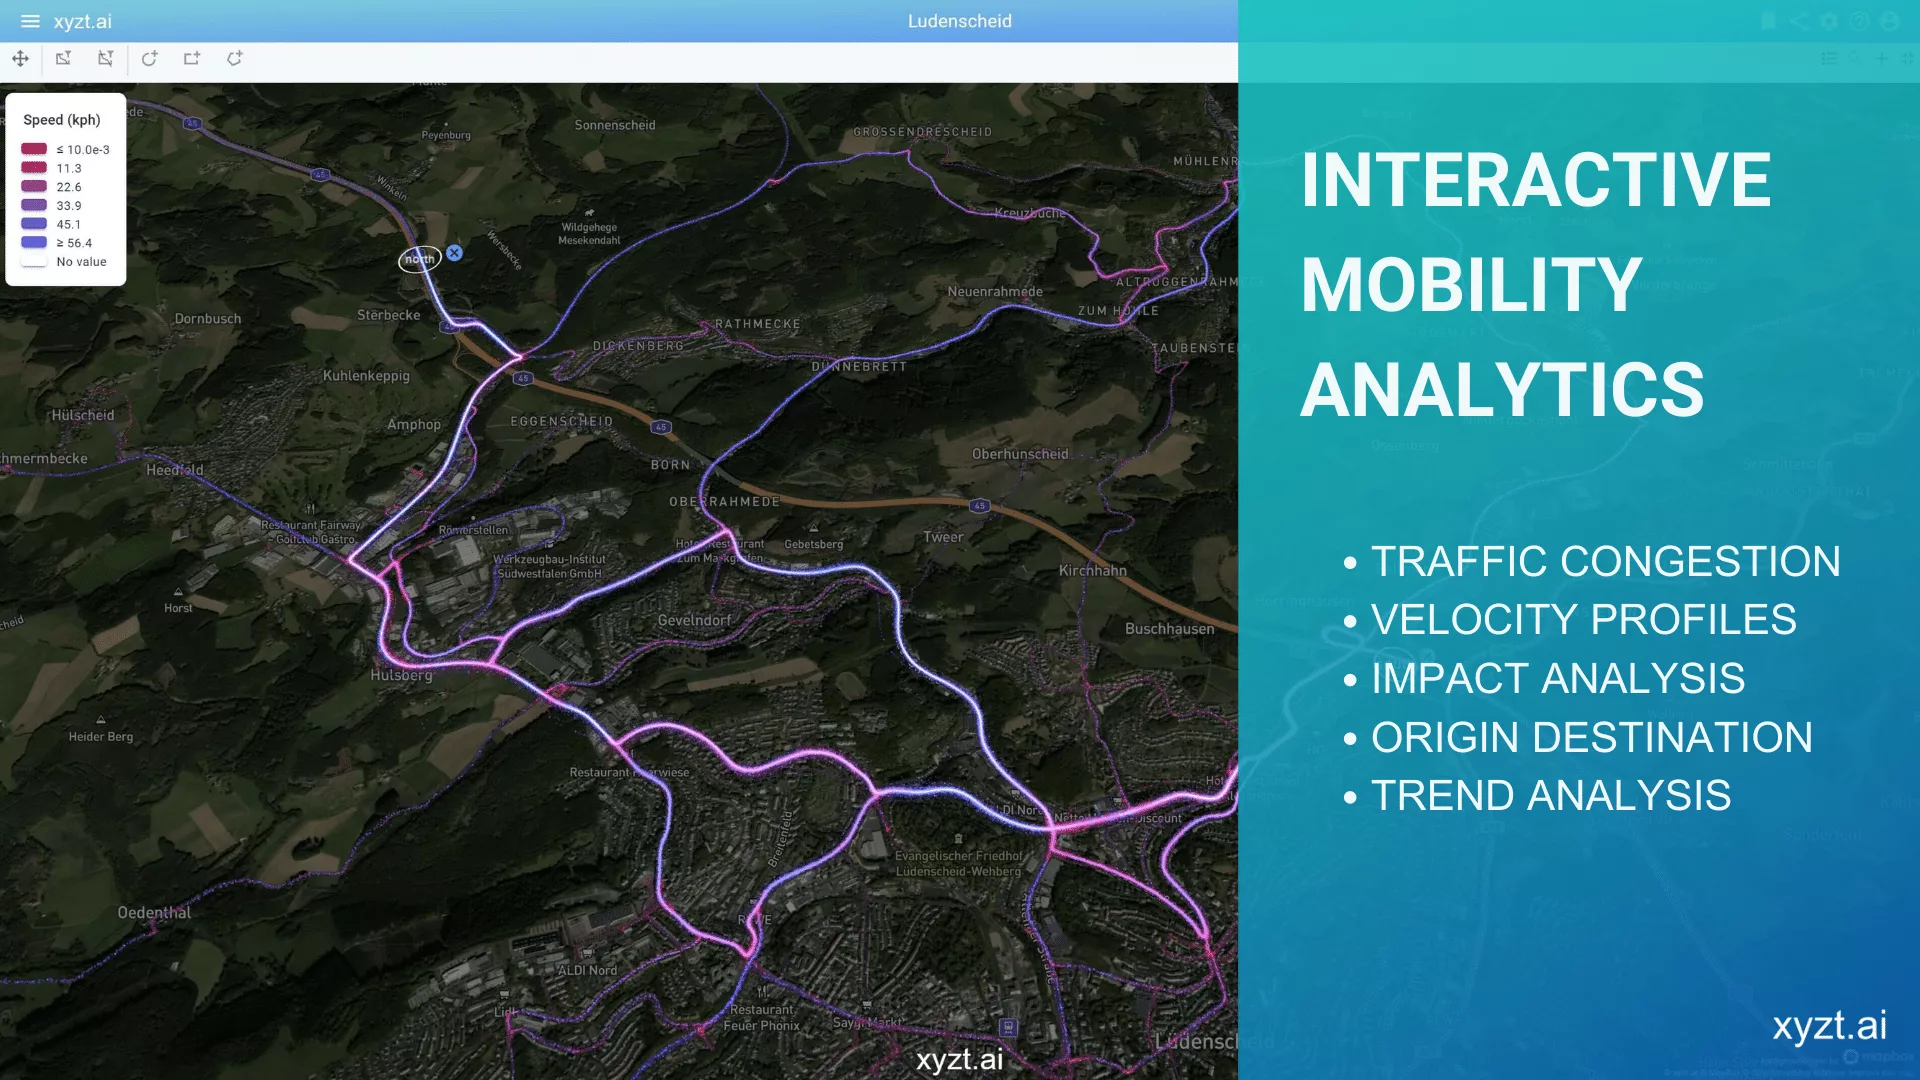 Advanced interactive mobility analytics for use cases such as traffic congestion, velocity profiles, impact analysis, origin destination, trend analysis, and more.